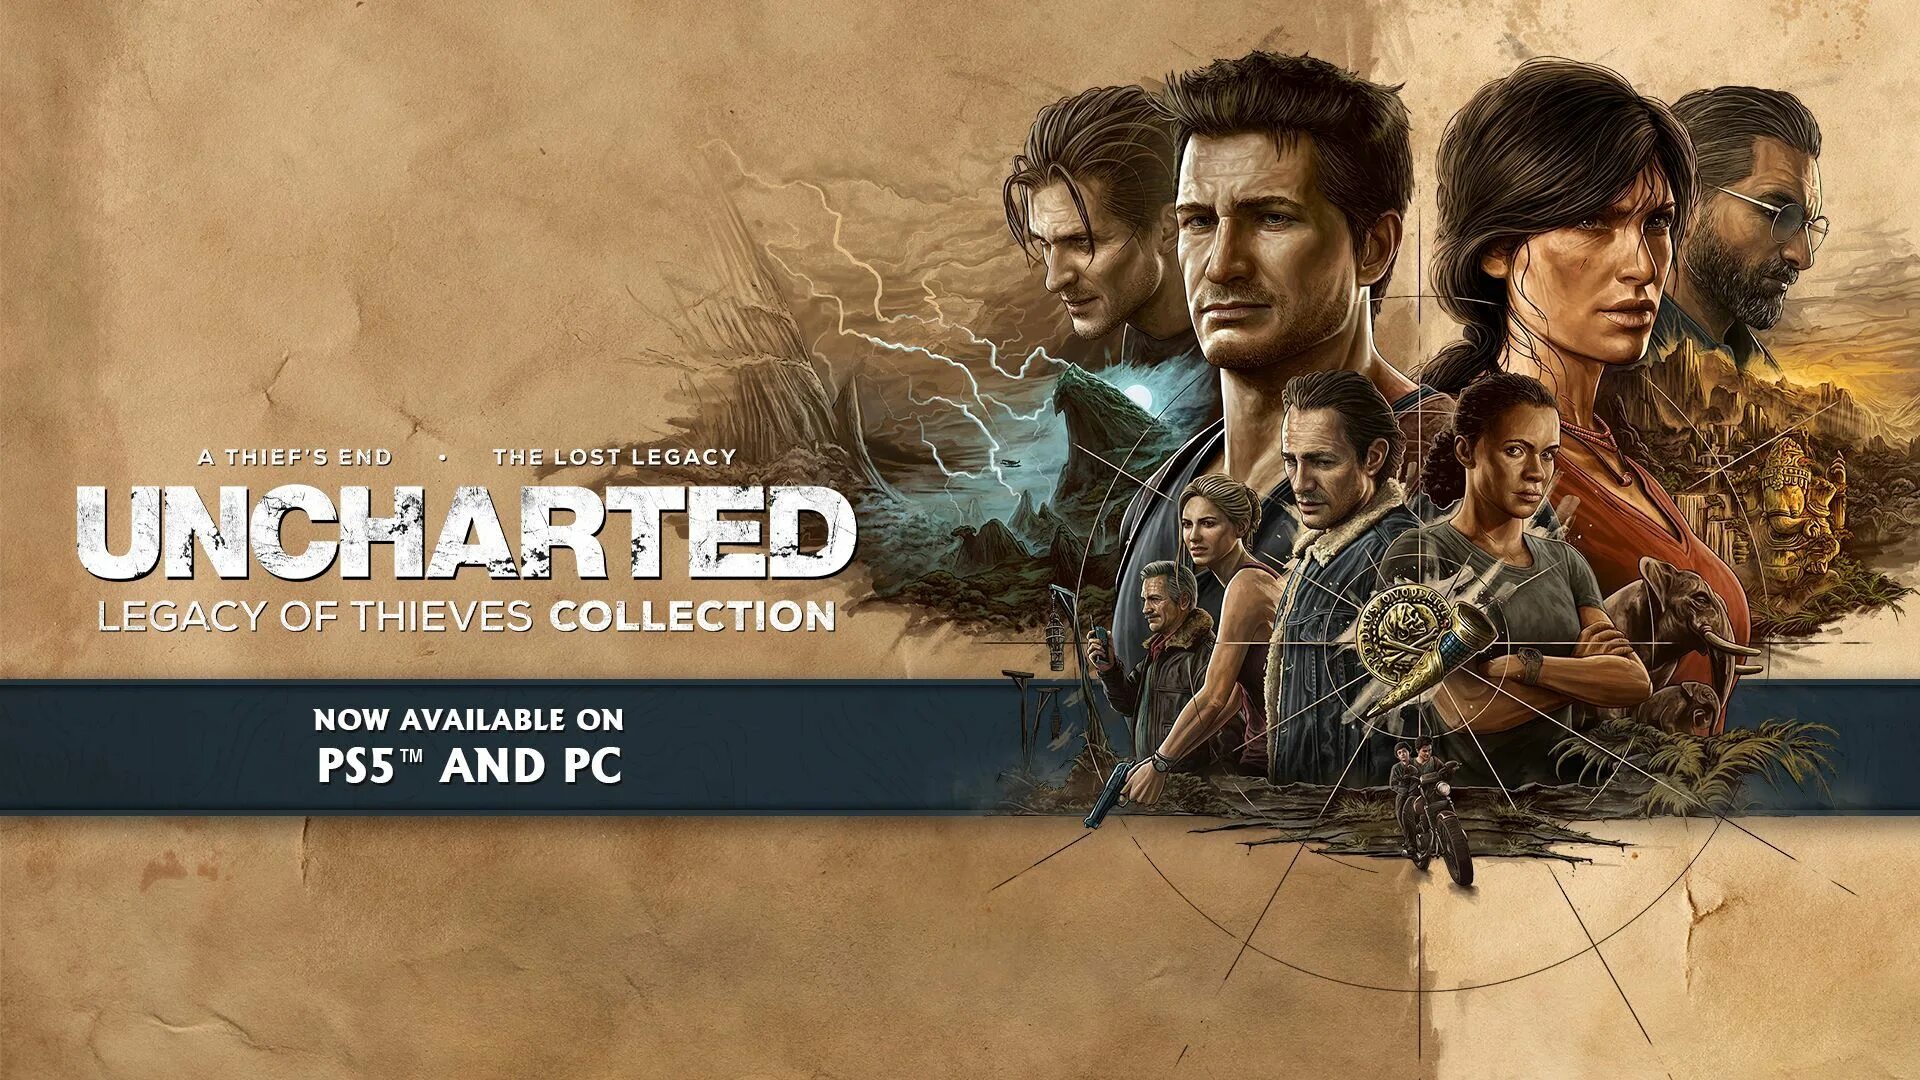 Uncharted™: наследие воров. Legacy of Thieves collection. Uncharted на ПК. Uncharted Legacy of Thieves collection на ПК. Uncharted thieves collection купить